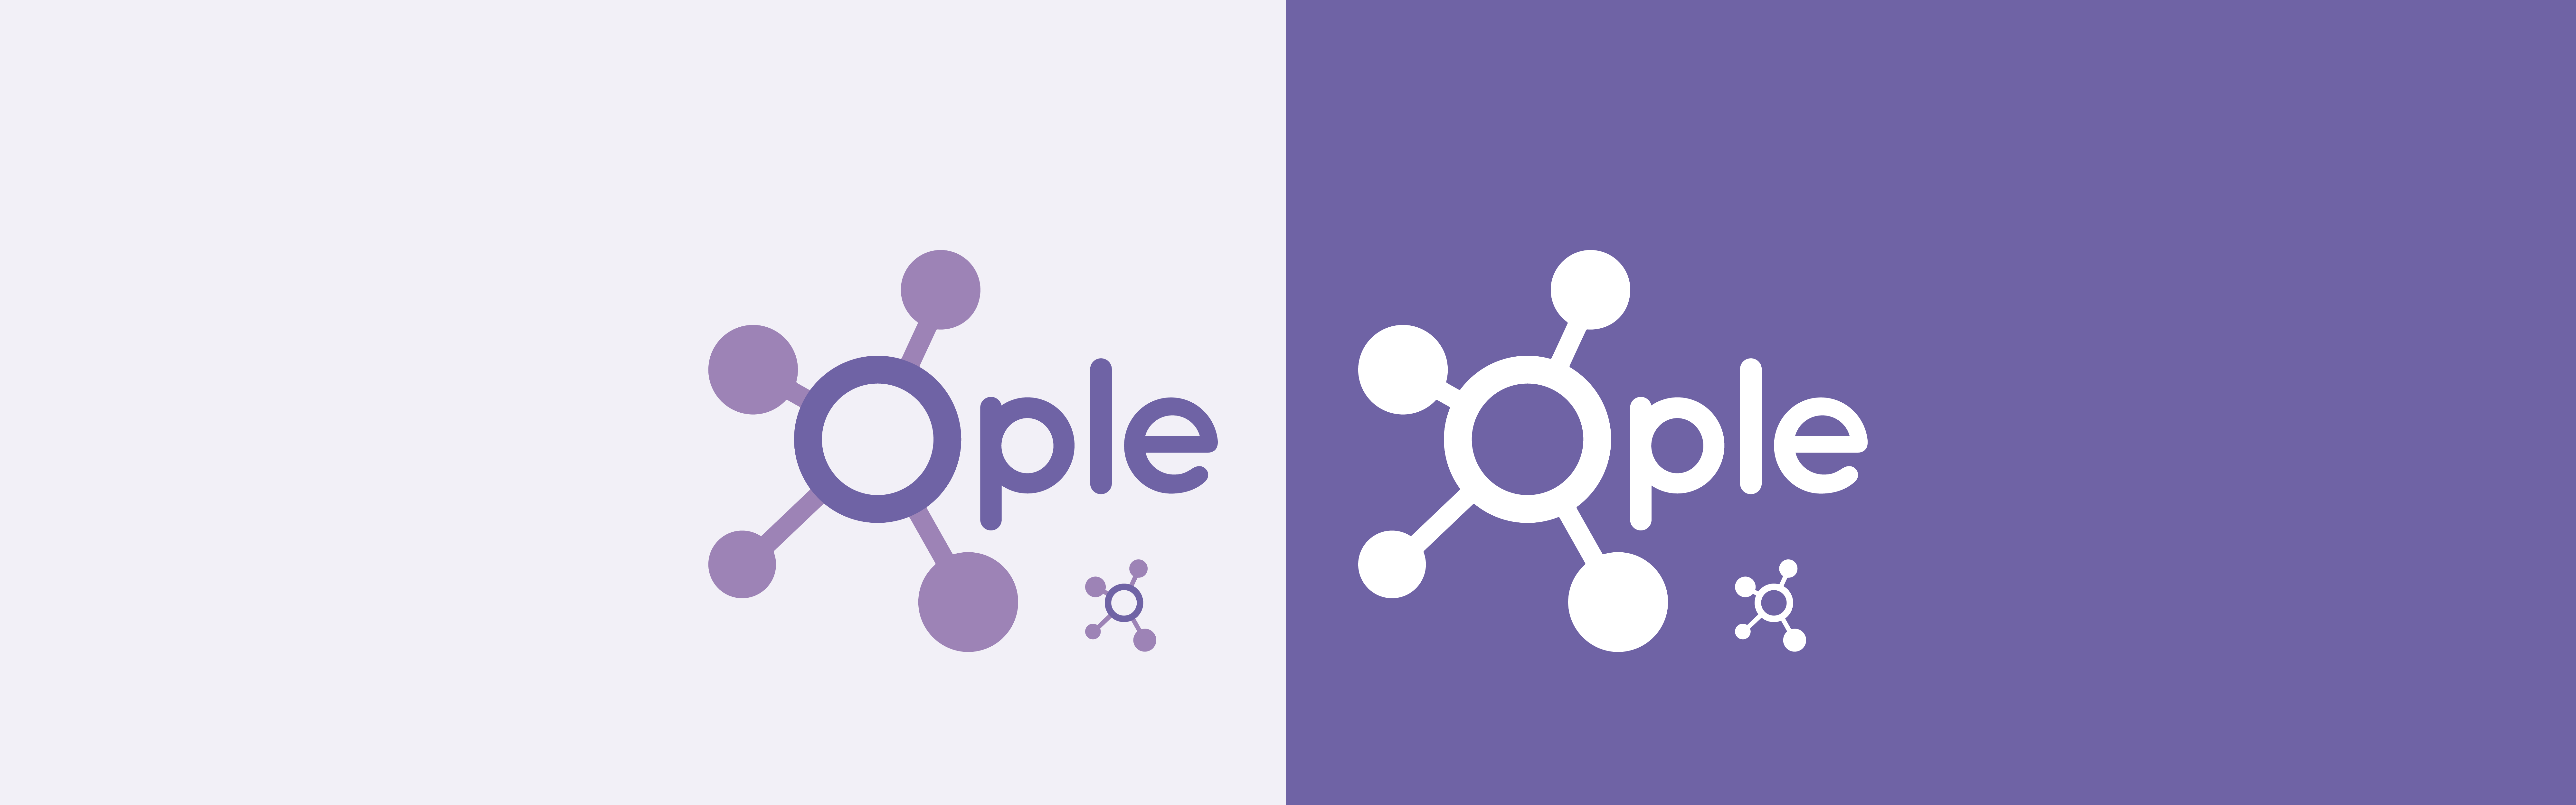 Two logos side by side, both showcasing the word "Ople" with an abstract, molecule-like icon adjacent to the text. The left logo is on a light purple background, while the right logo